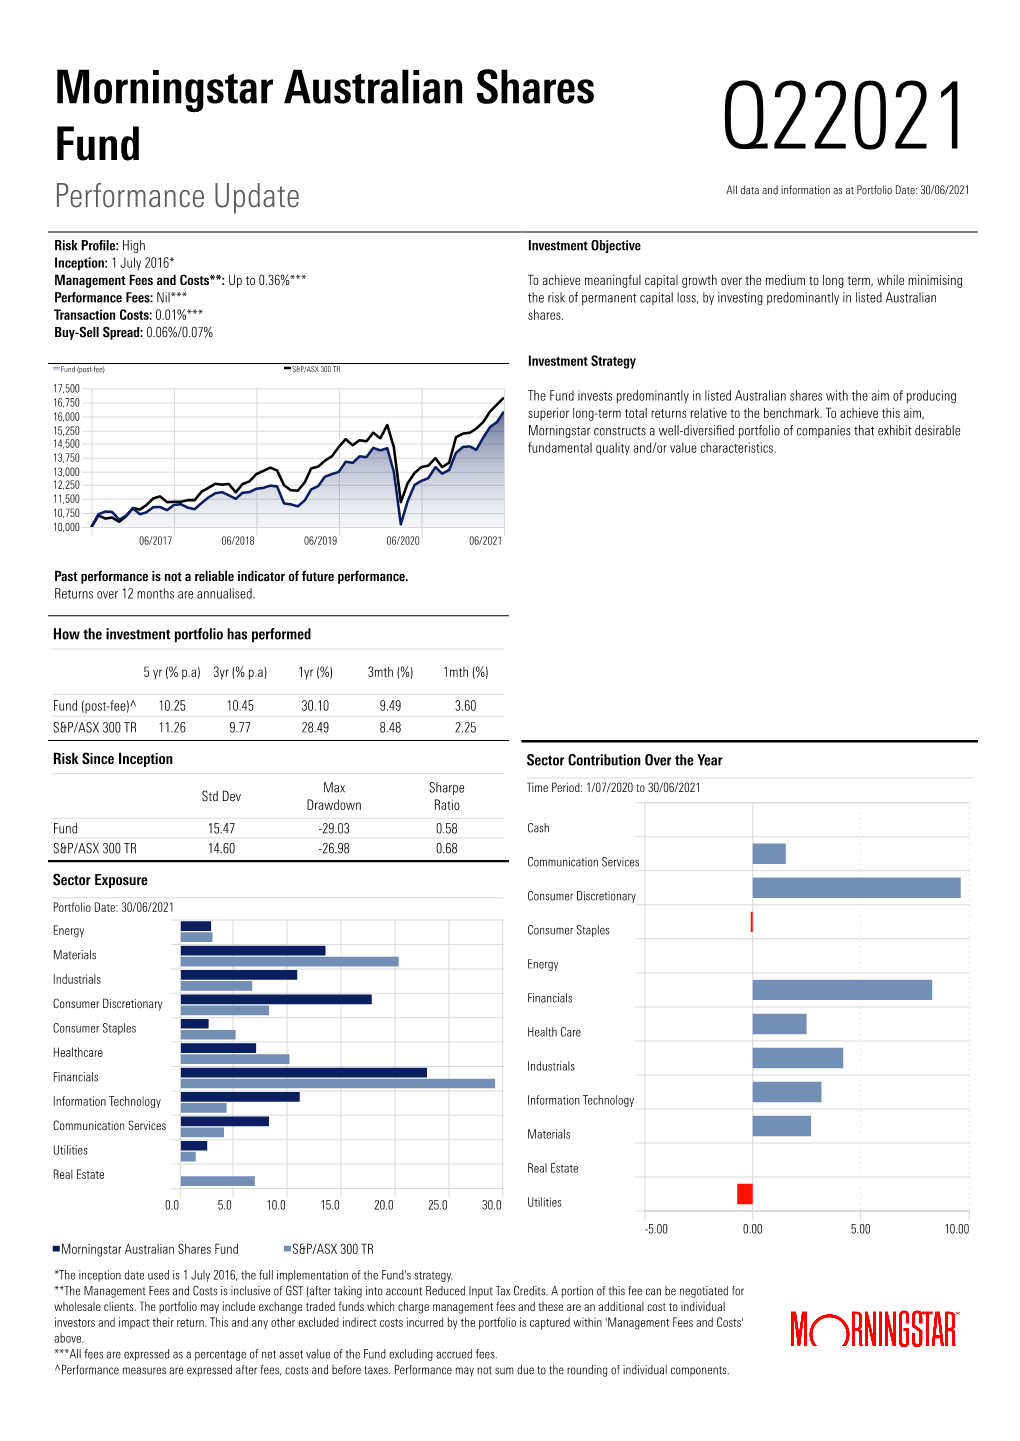 Q22021 Performance Update All Data and Information As at Portfolio Date: 30/06/2021